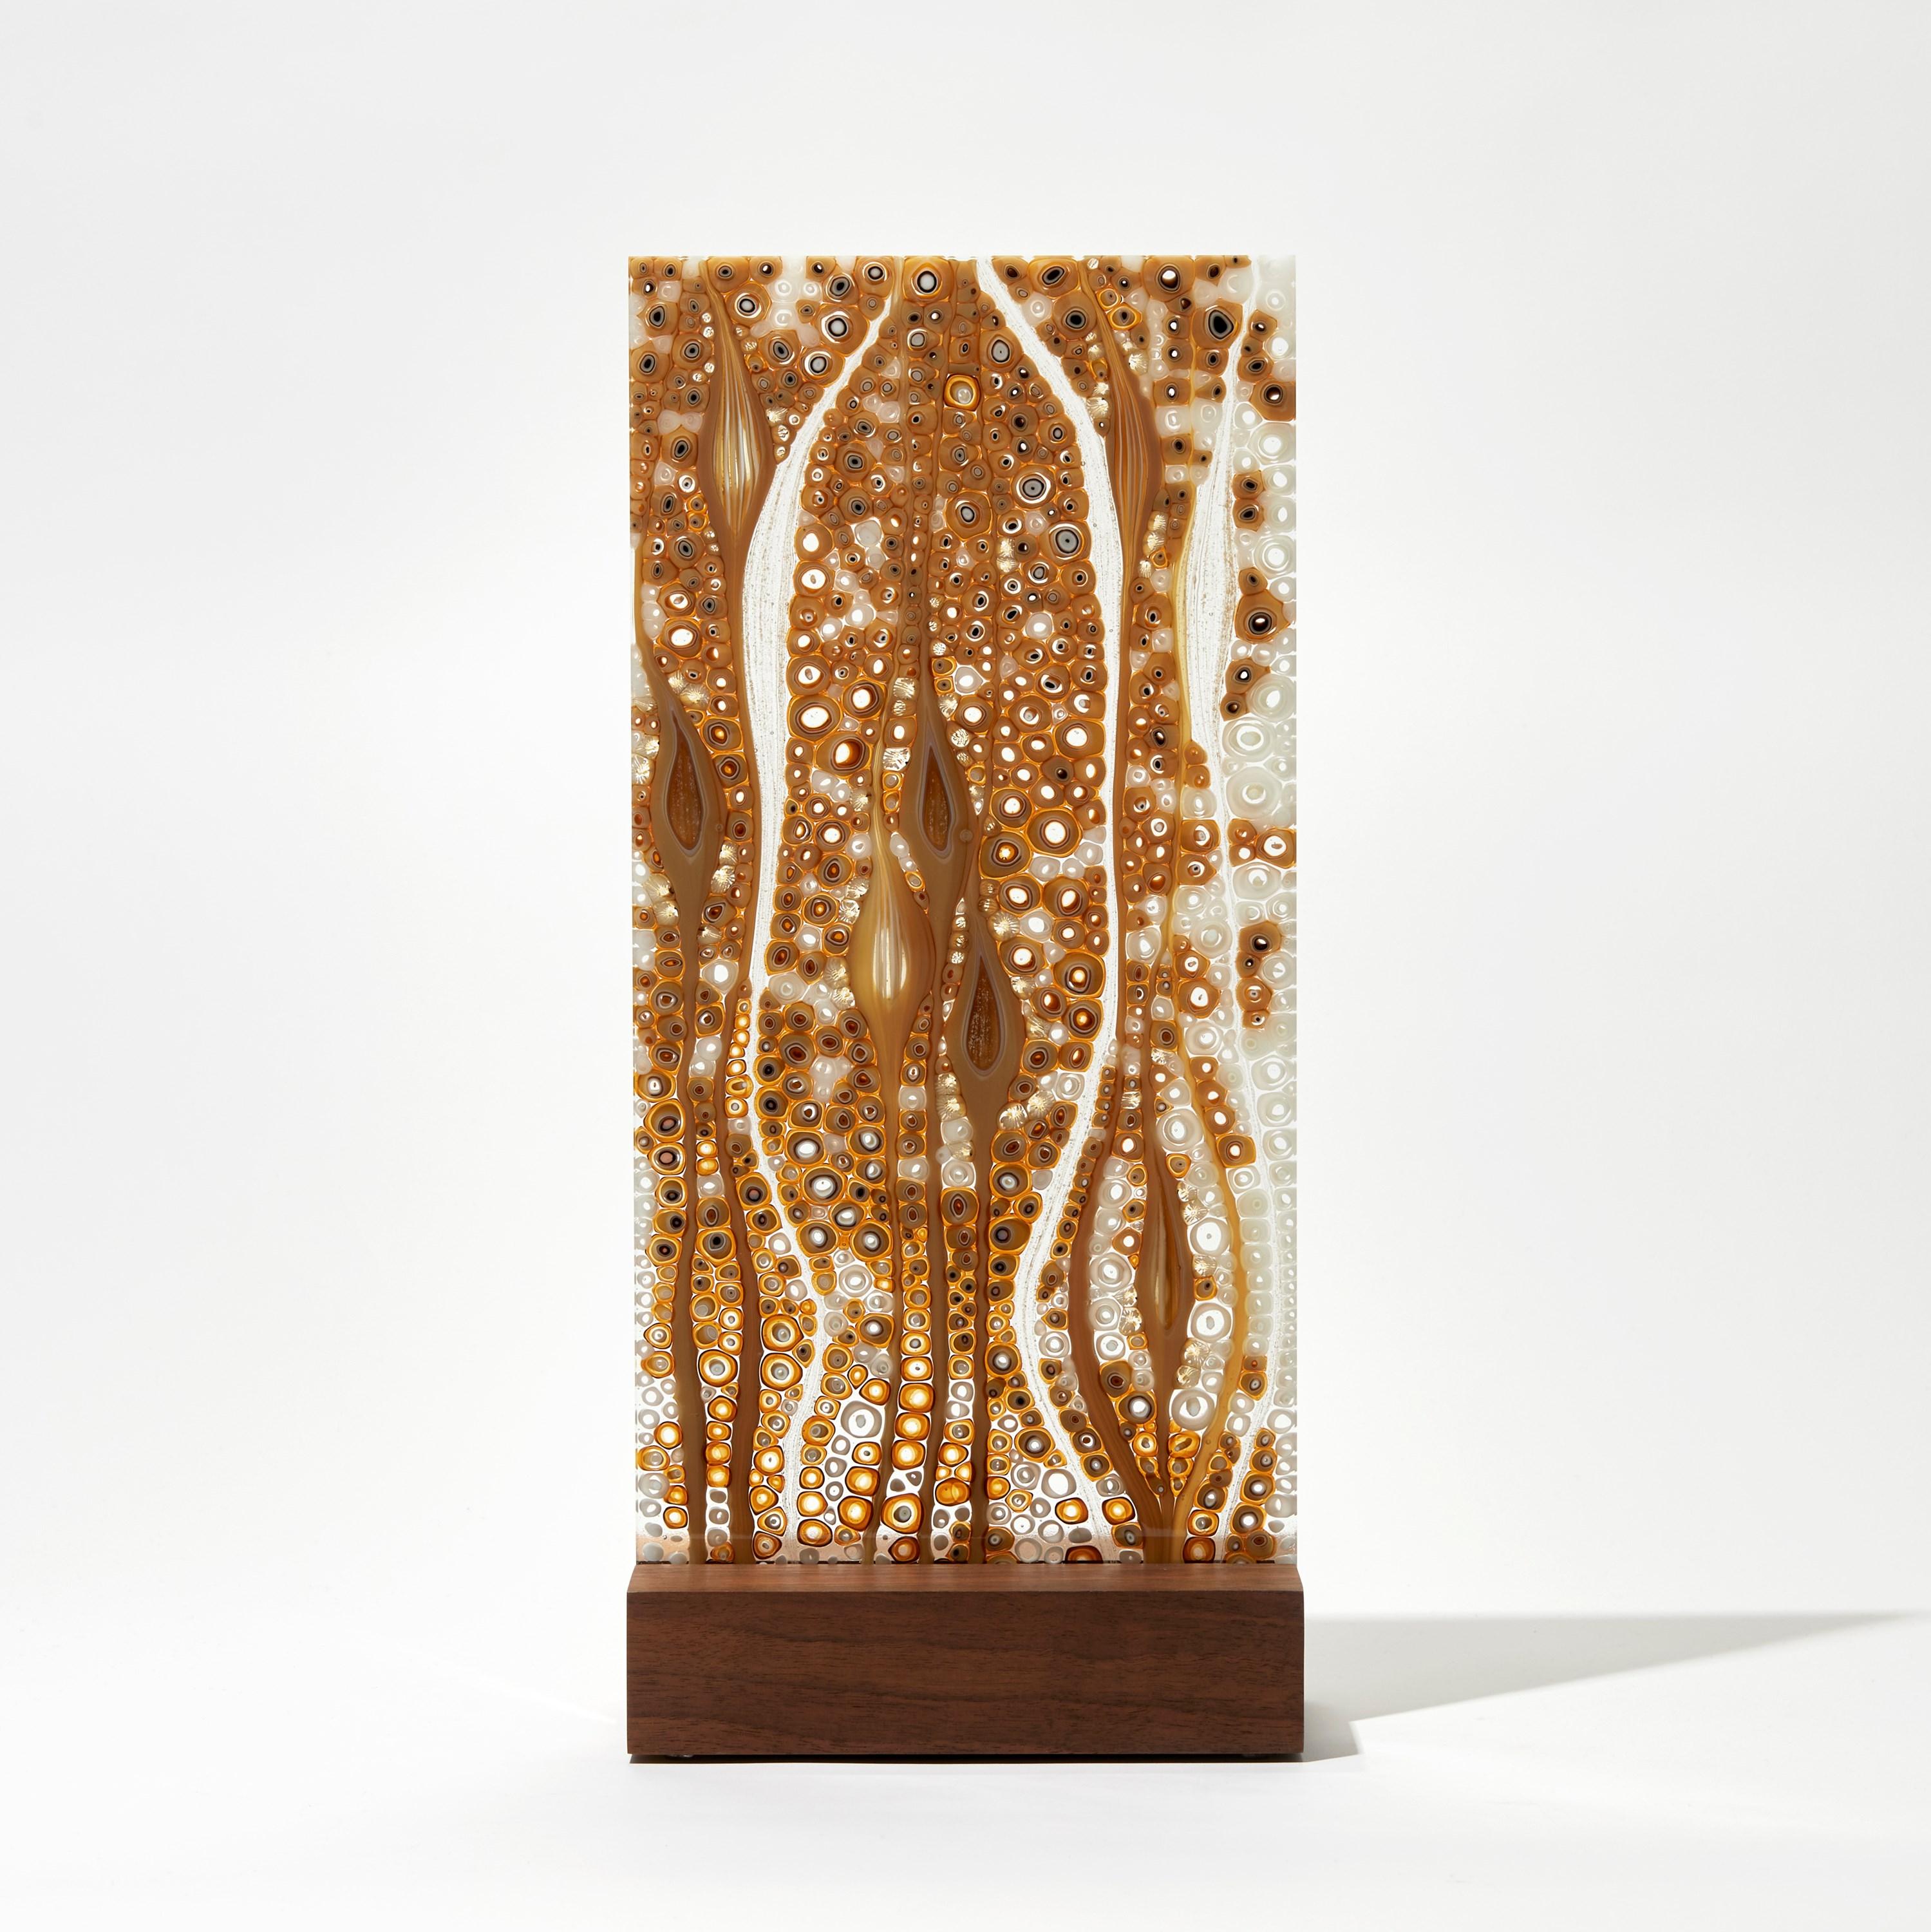 'Orientation in Gold No 4' is a unique glass sculpture by the Austrian artist Sandra A. Fuchs, created in amber, white and clear glass. 

Fuchs creates her own multicoloured and complex glass canes, which are then cut to create small 'murrina'.